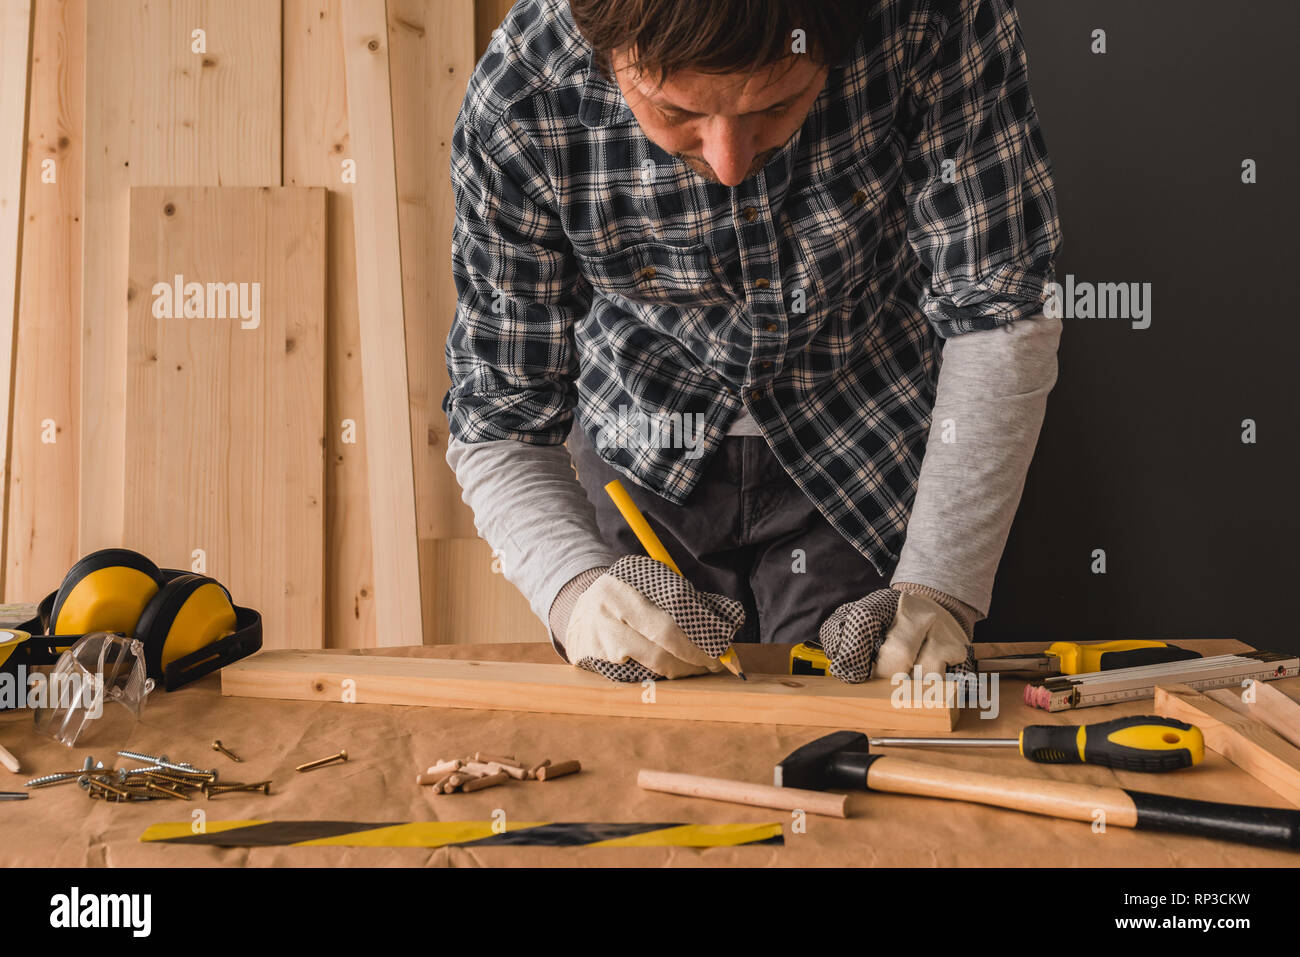 Carpenter sketching pine wood plank for cutting in workshop for small business woodwork project Stock Photo